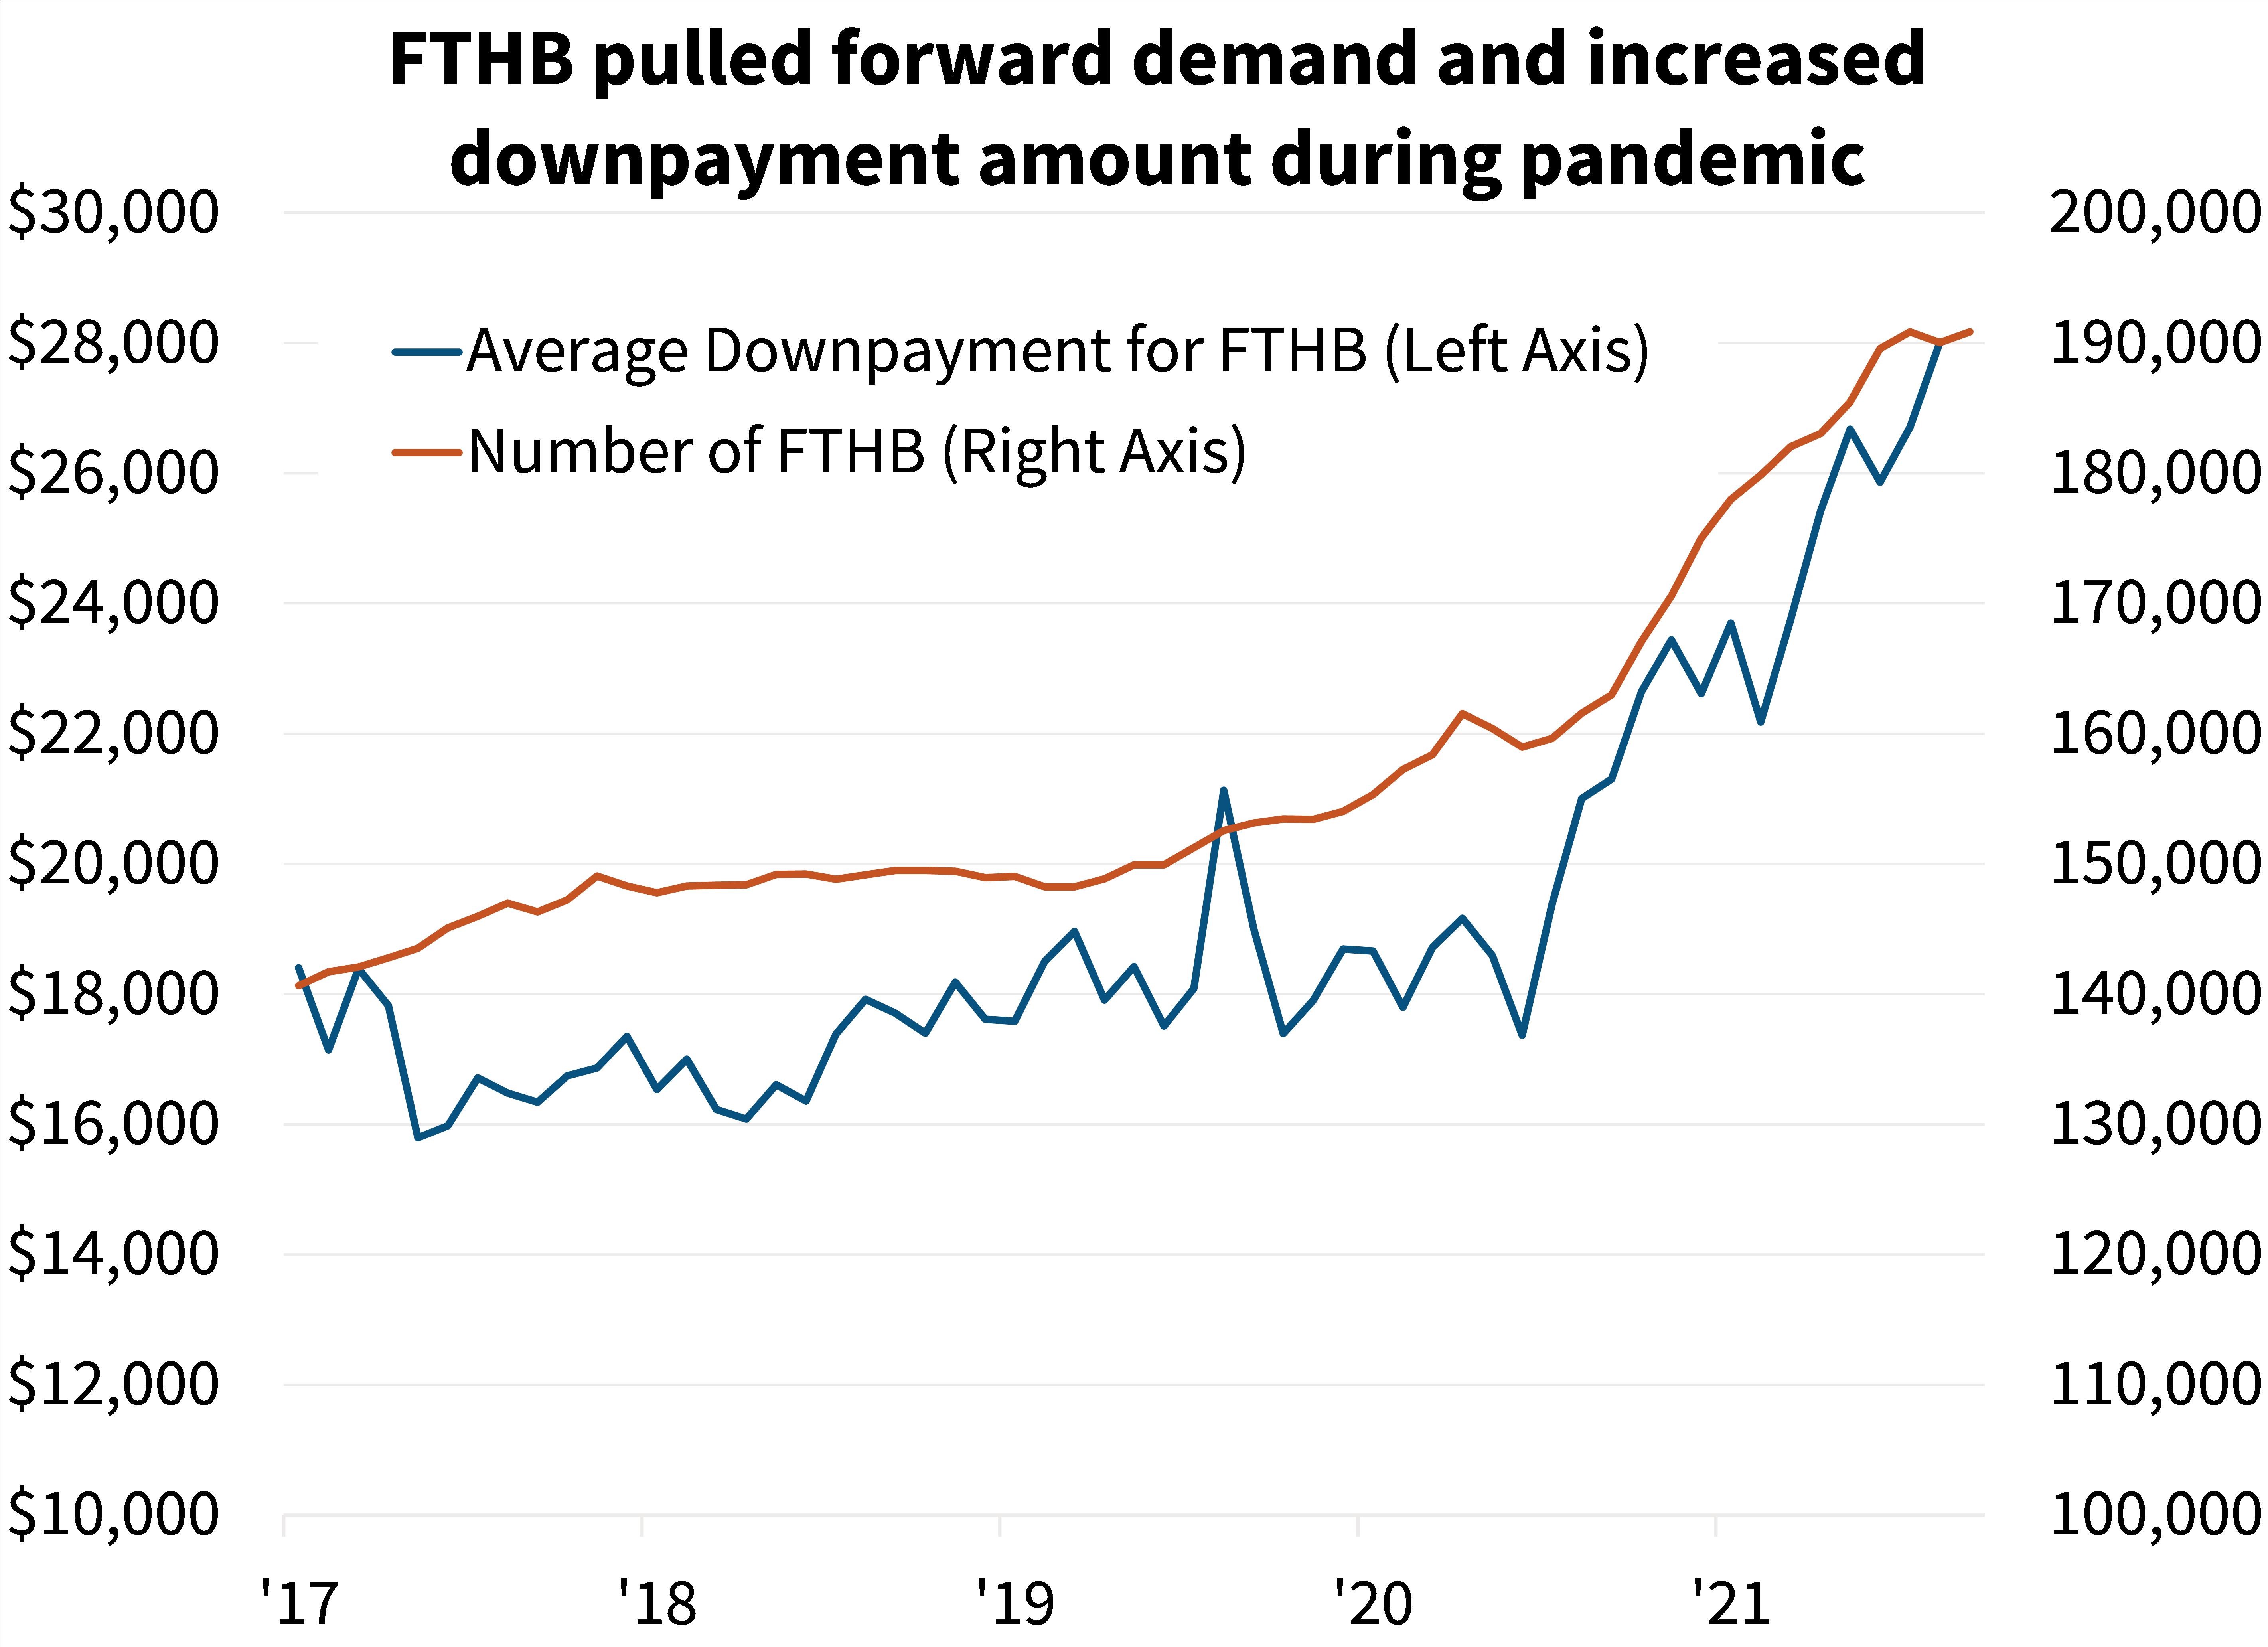  FTHB pulled forward demand and increased down payment amount during pandemic